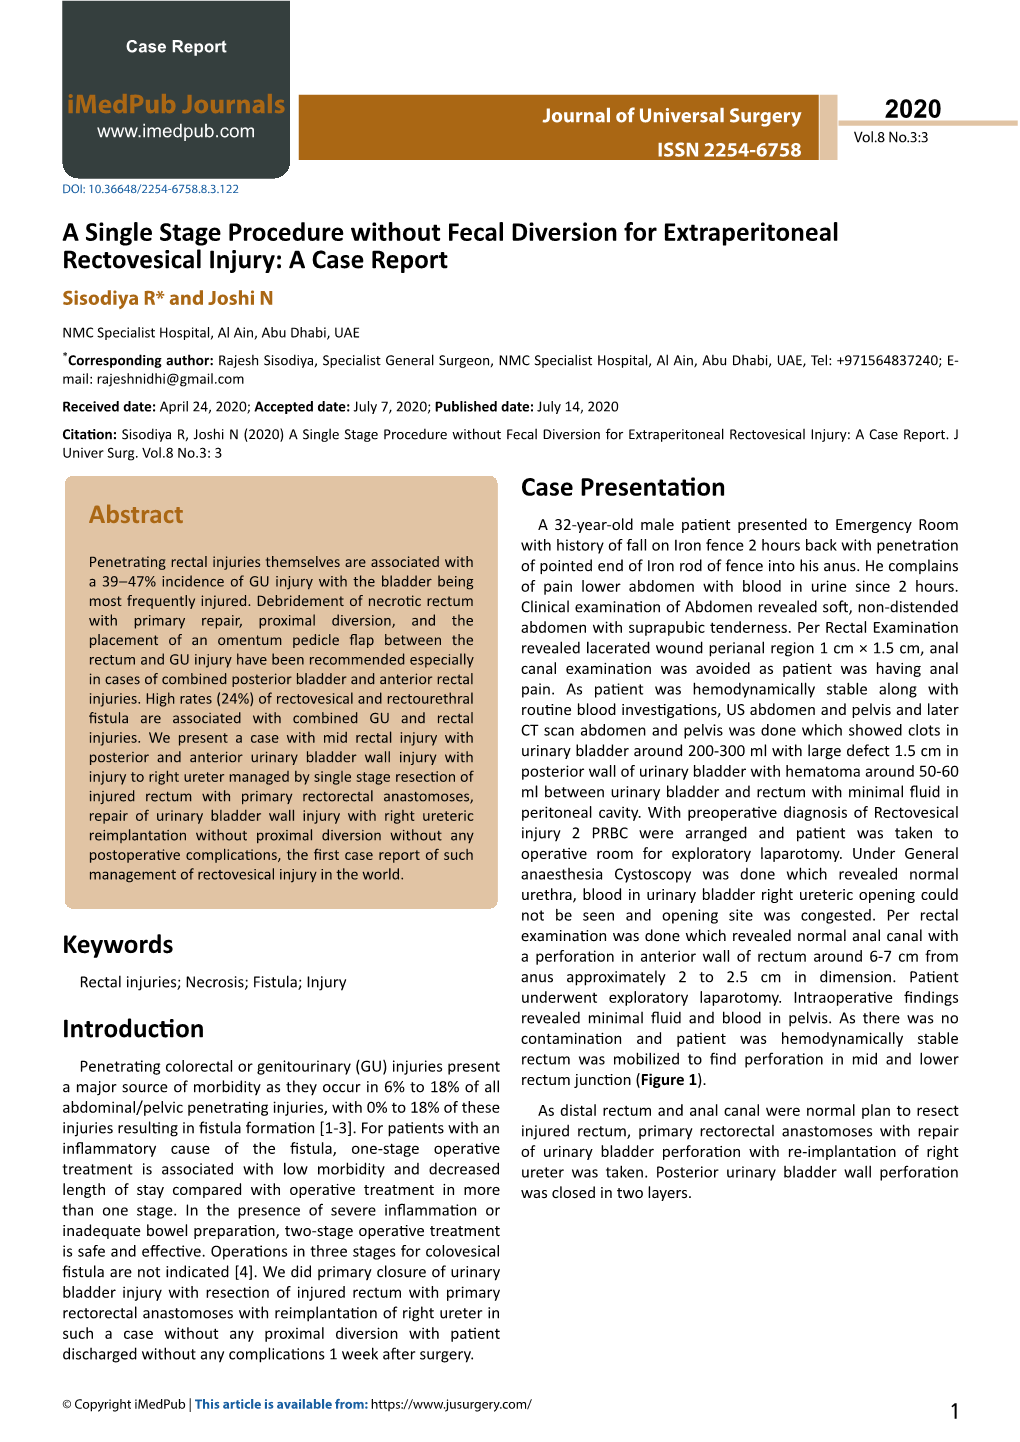 A Single Stage Procedure Without Fecal Diversion for Extraperitoneal Rectovesical Injury: a Case Report Sisodiya R* and Joshi N